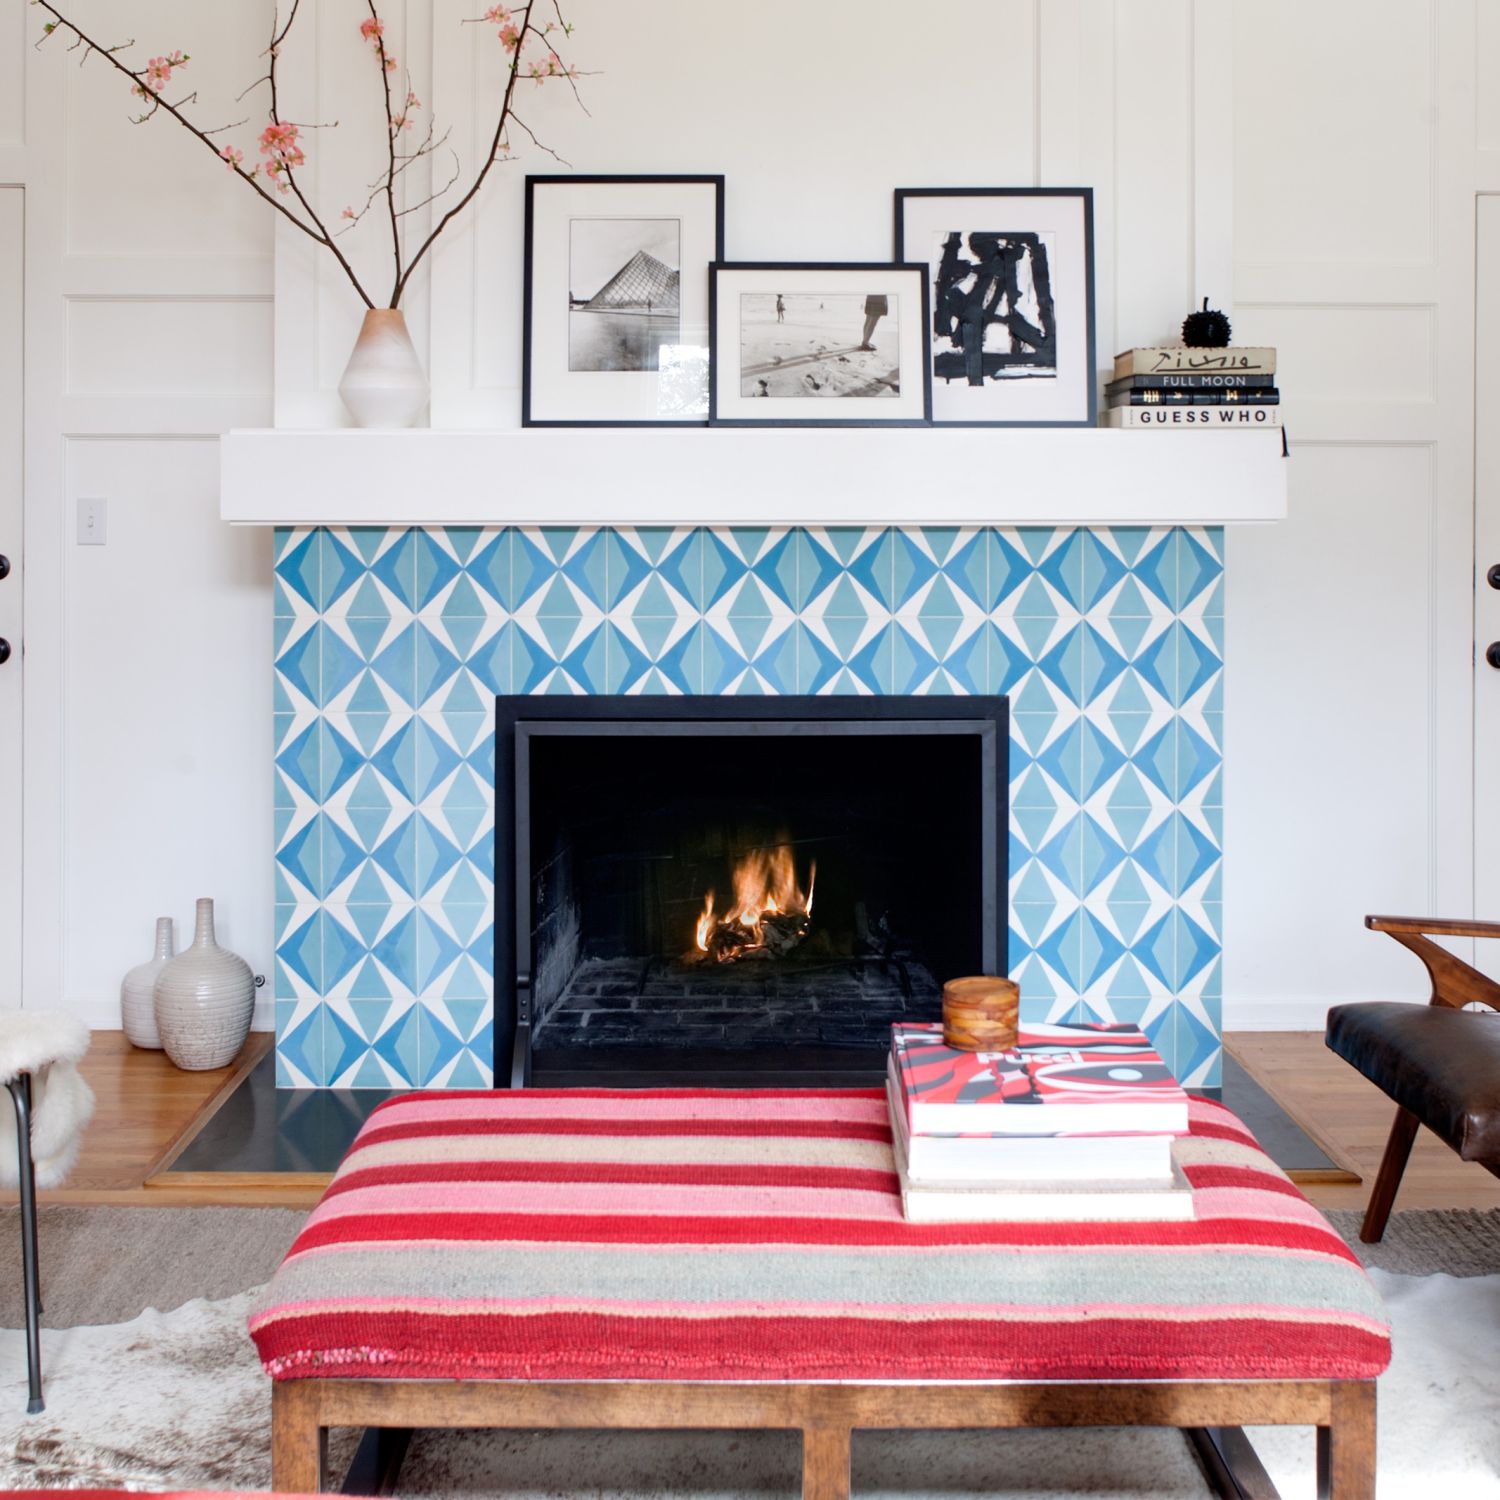 A blue and white tile fireplace in a living room